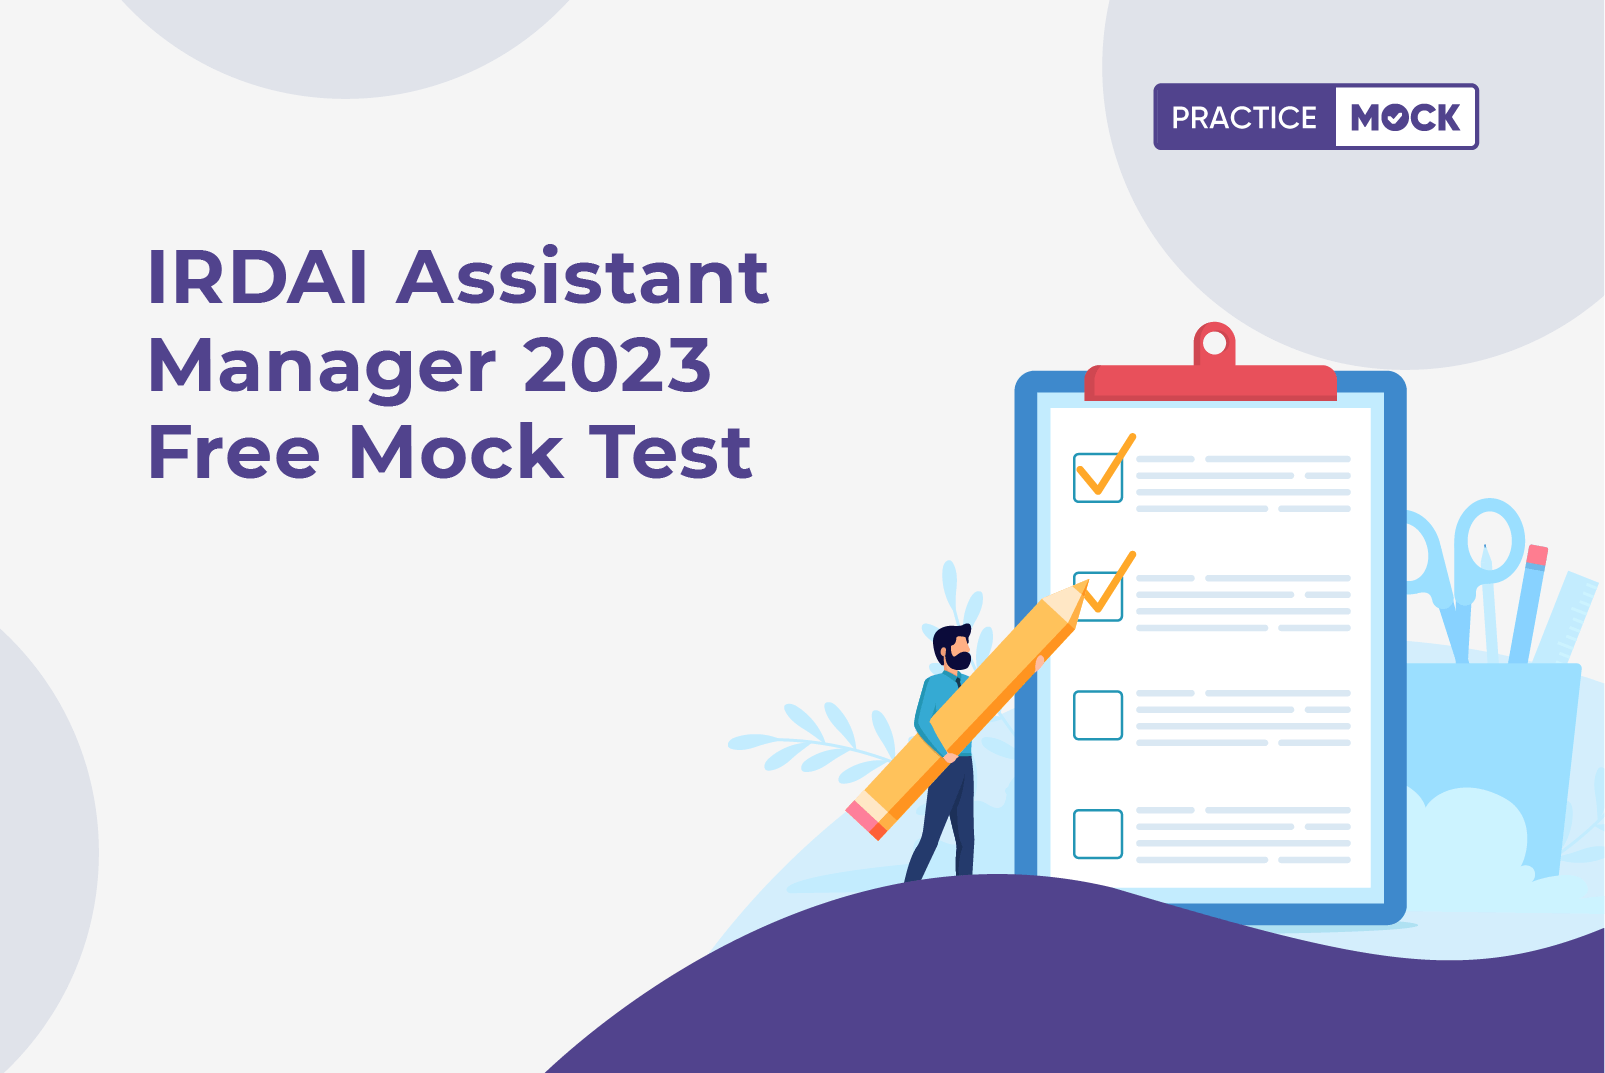 IRDAI Assistant Manager 2023 Free Mock Test